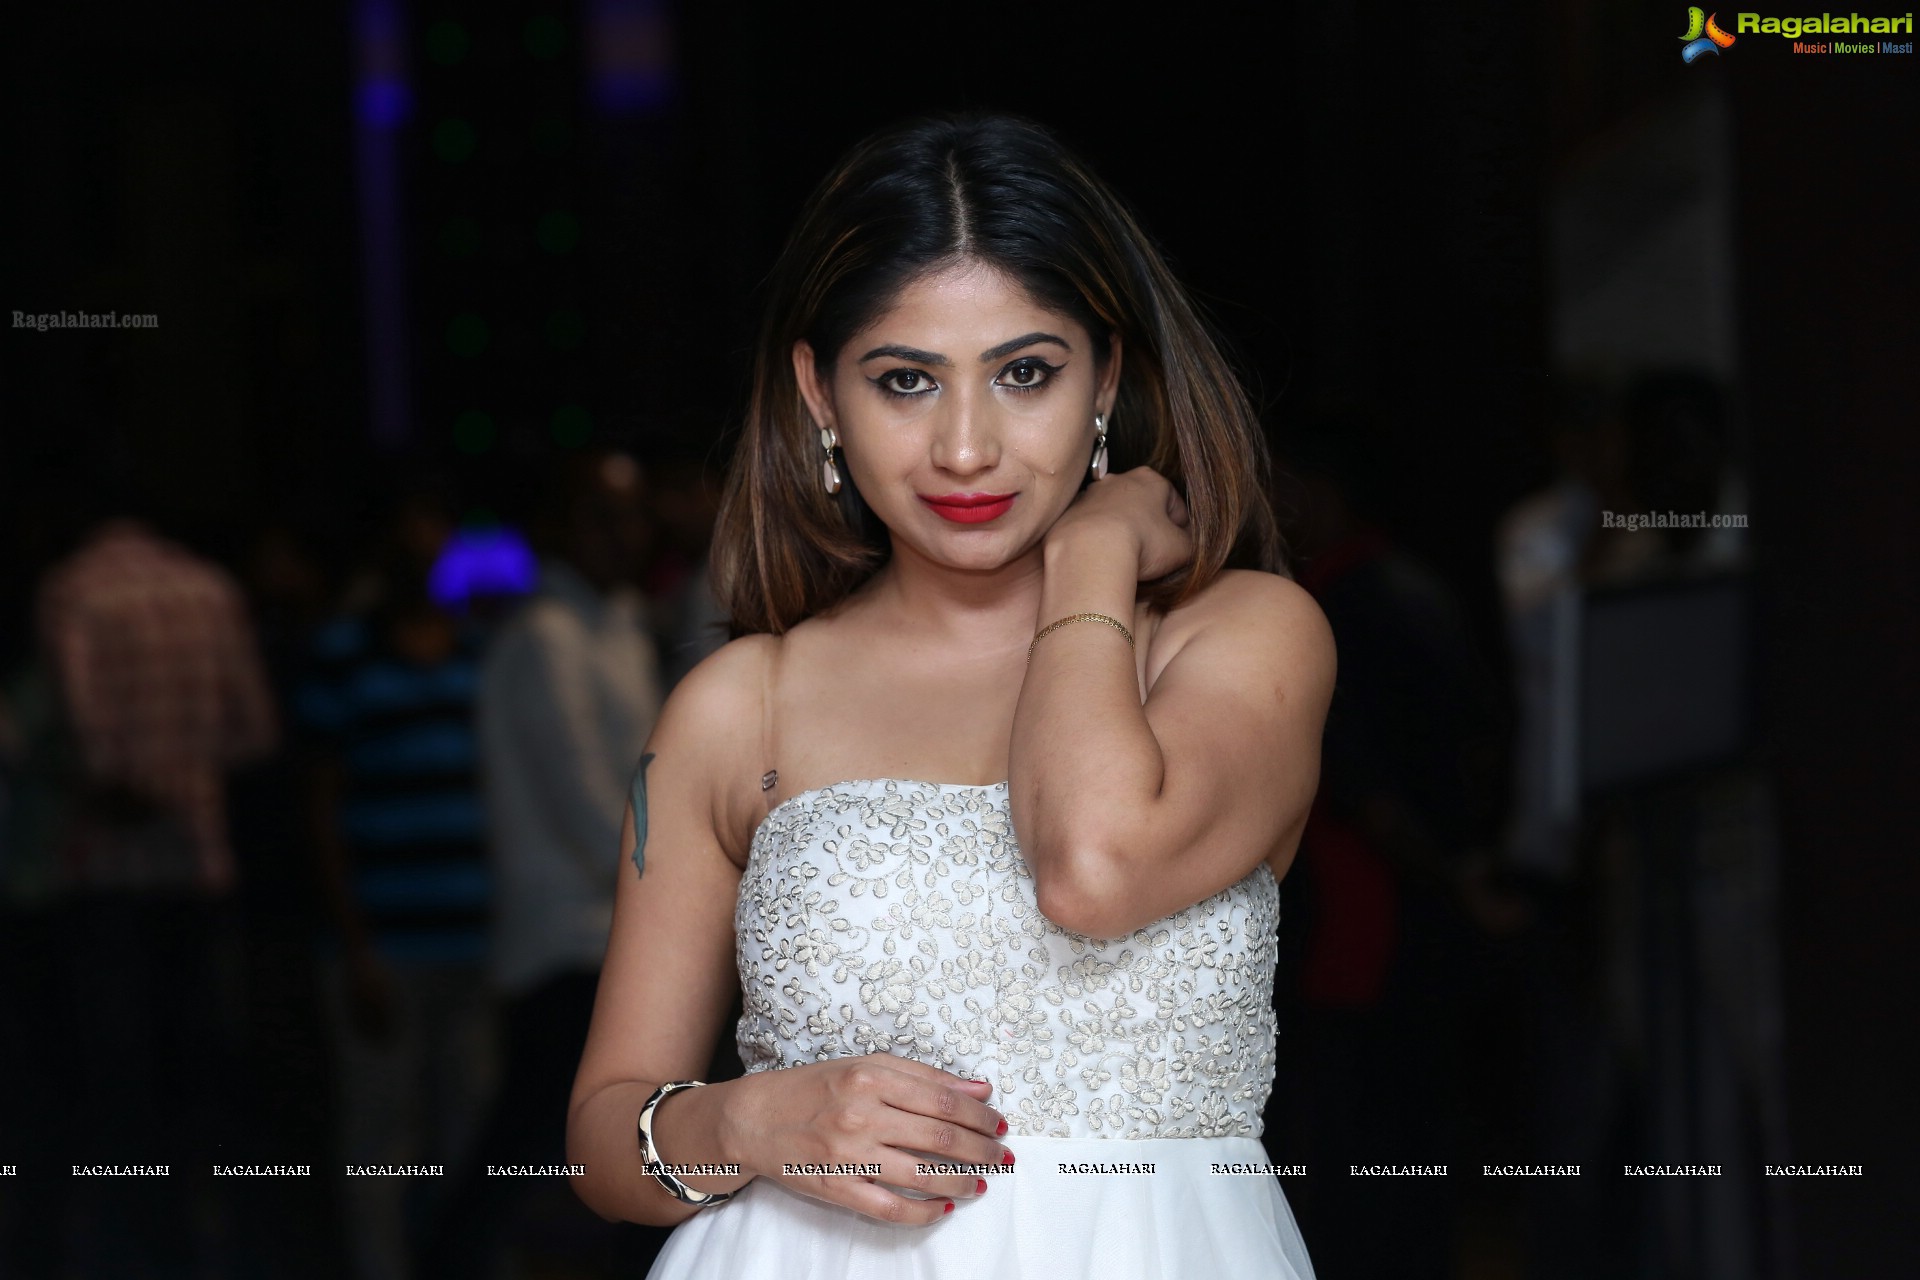 Madhulagna Das at Space Vision Group New Project Launch - HD Gallery